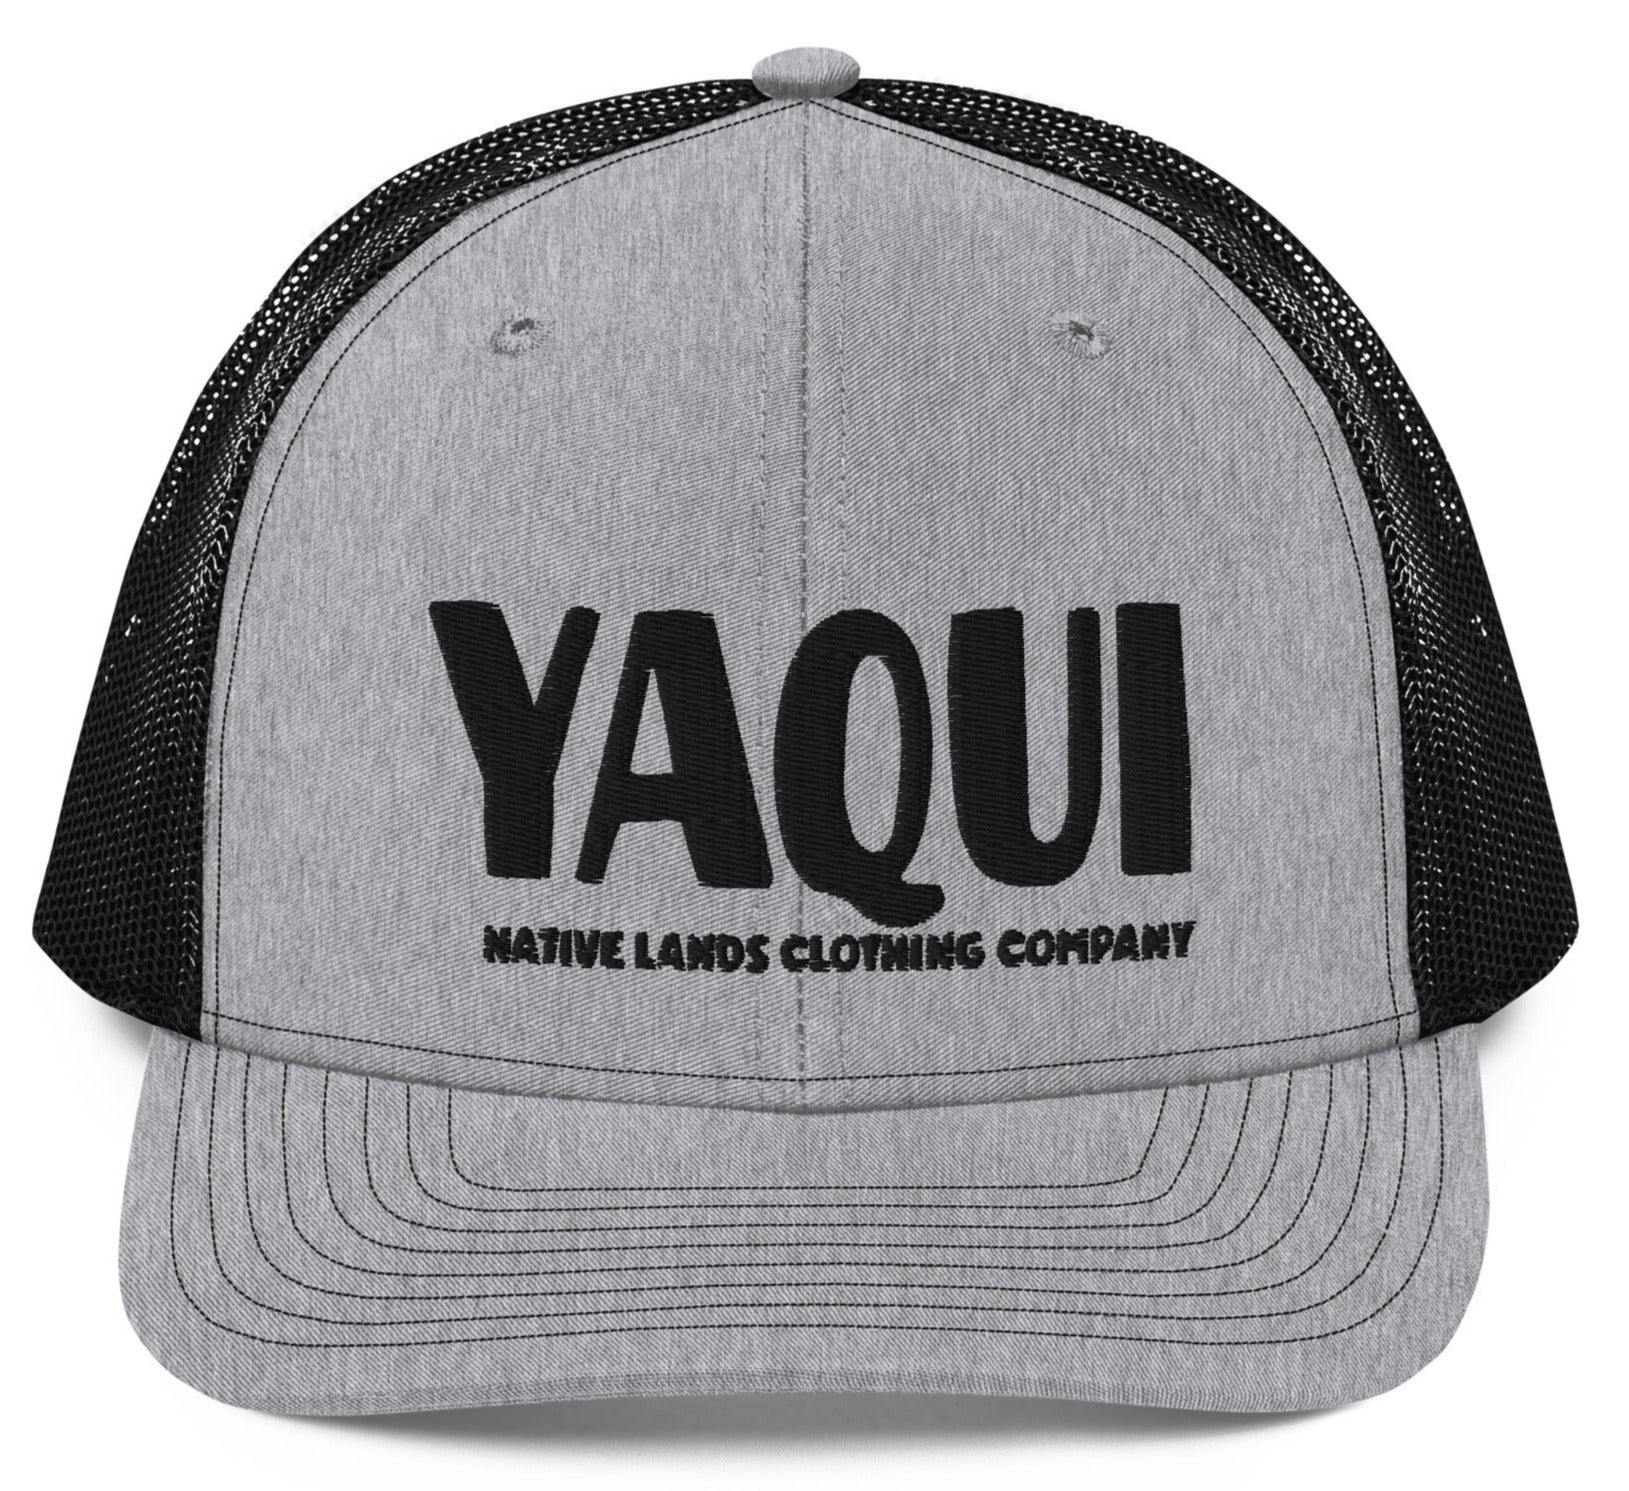 Yaqui Tribe Trucker Cap Embroidered Native American $ 25.50 Snapback Embroidered Baseball Cap Native Lands Clothing Company LLC